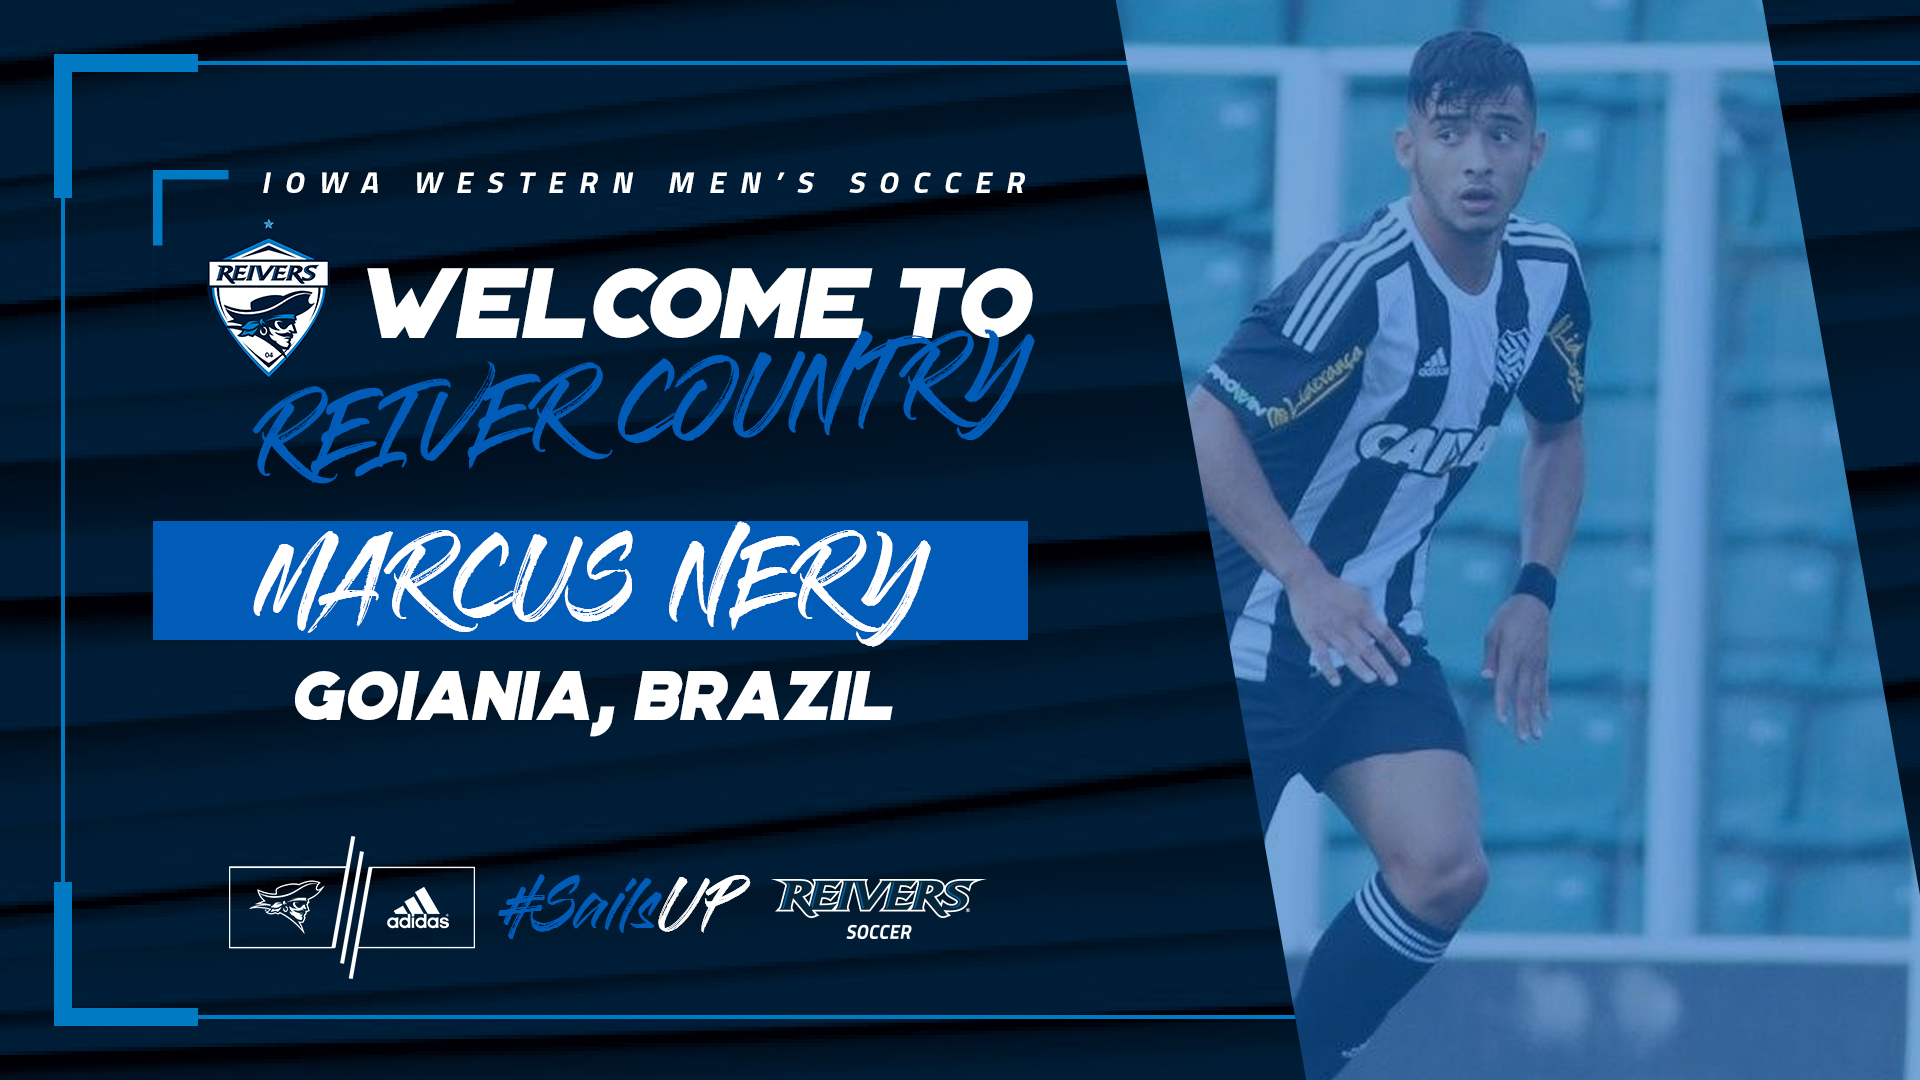 Marcus Nery to join Reiver soccer family in 2019